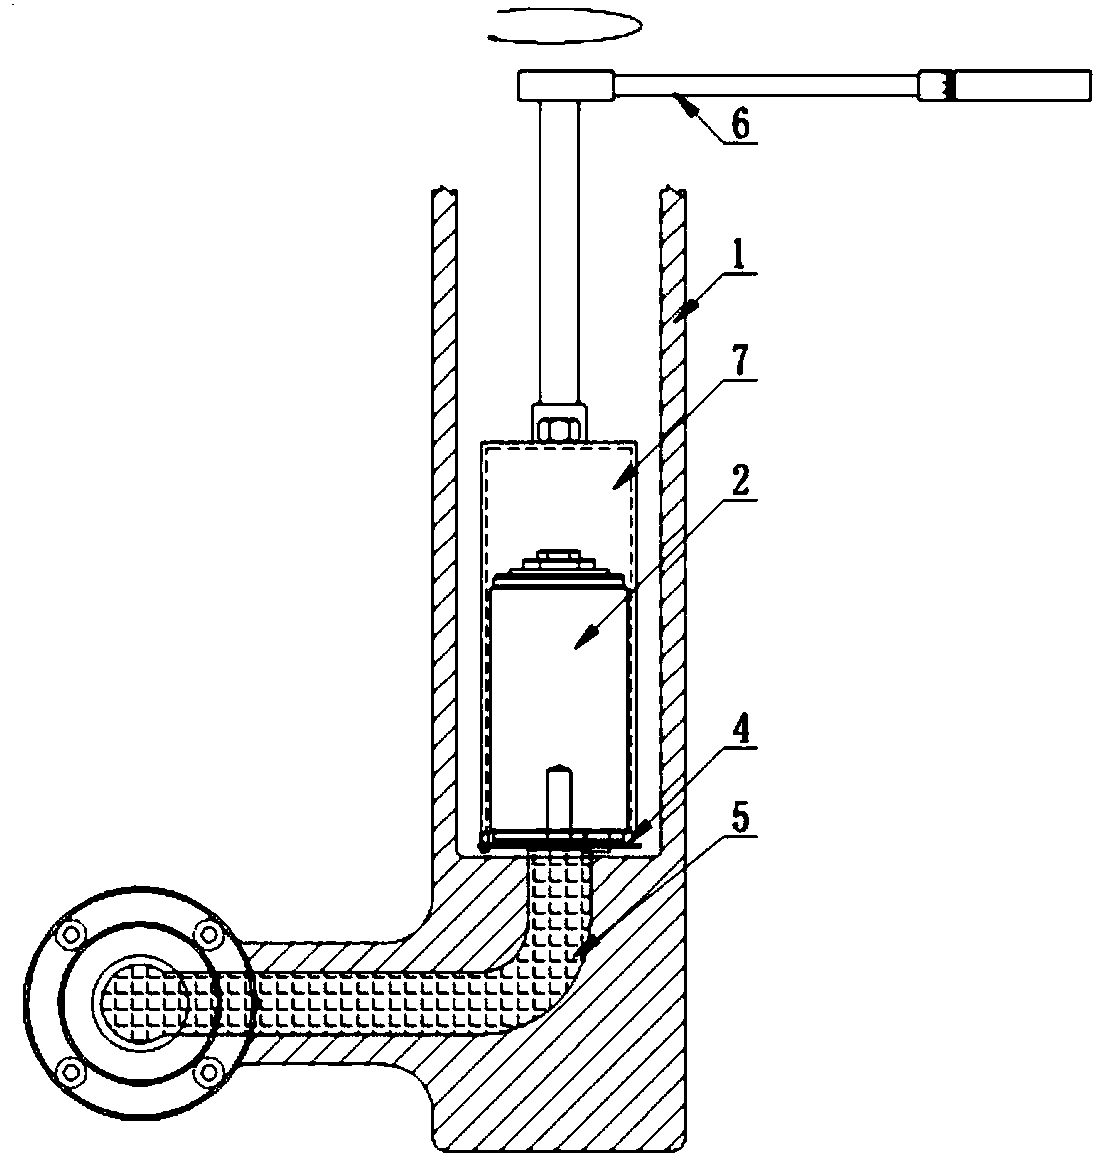 Installing structure and process for vacuum switch tube